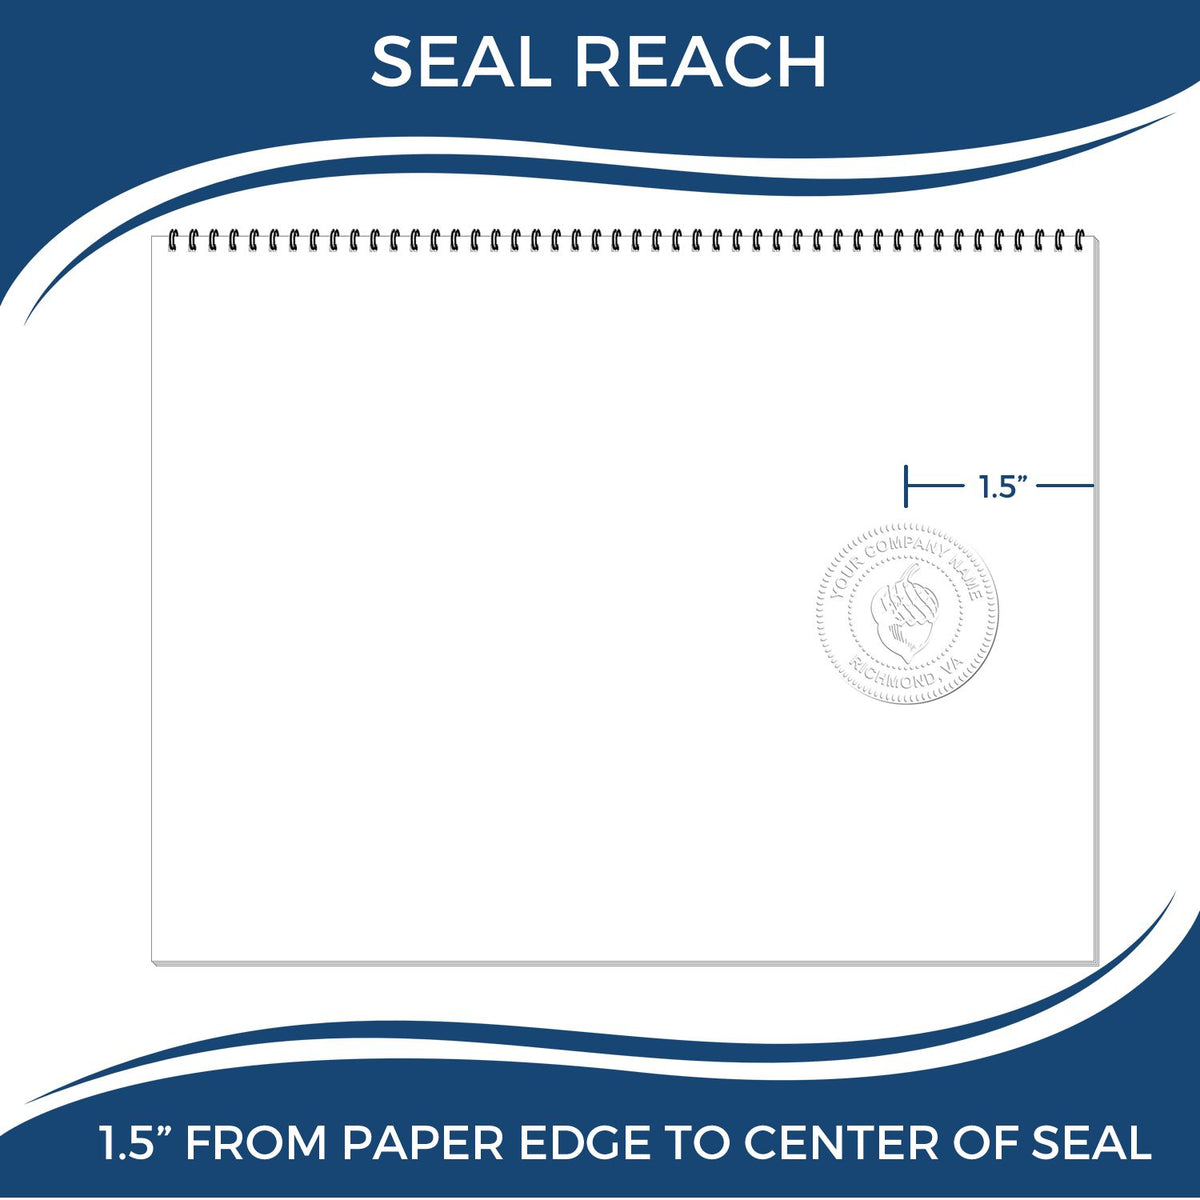 An infographic showing the seal reach which is represented by a ruler and a miniature seal image of the Gift Arizona Engineer Seal